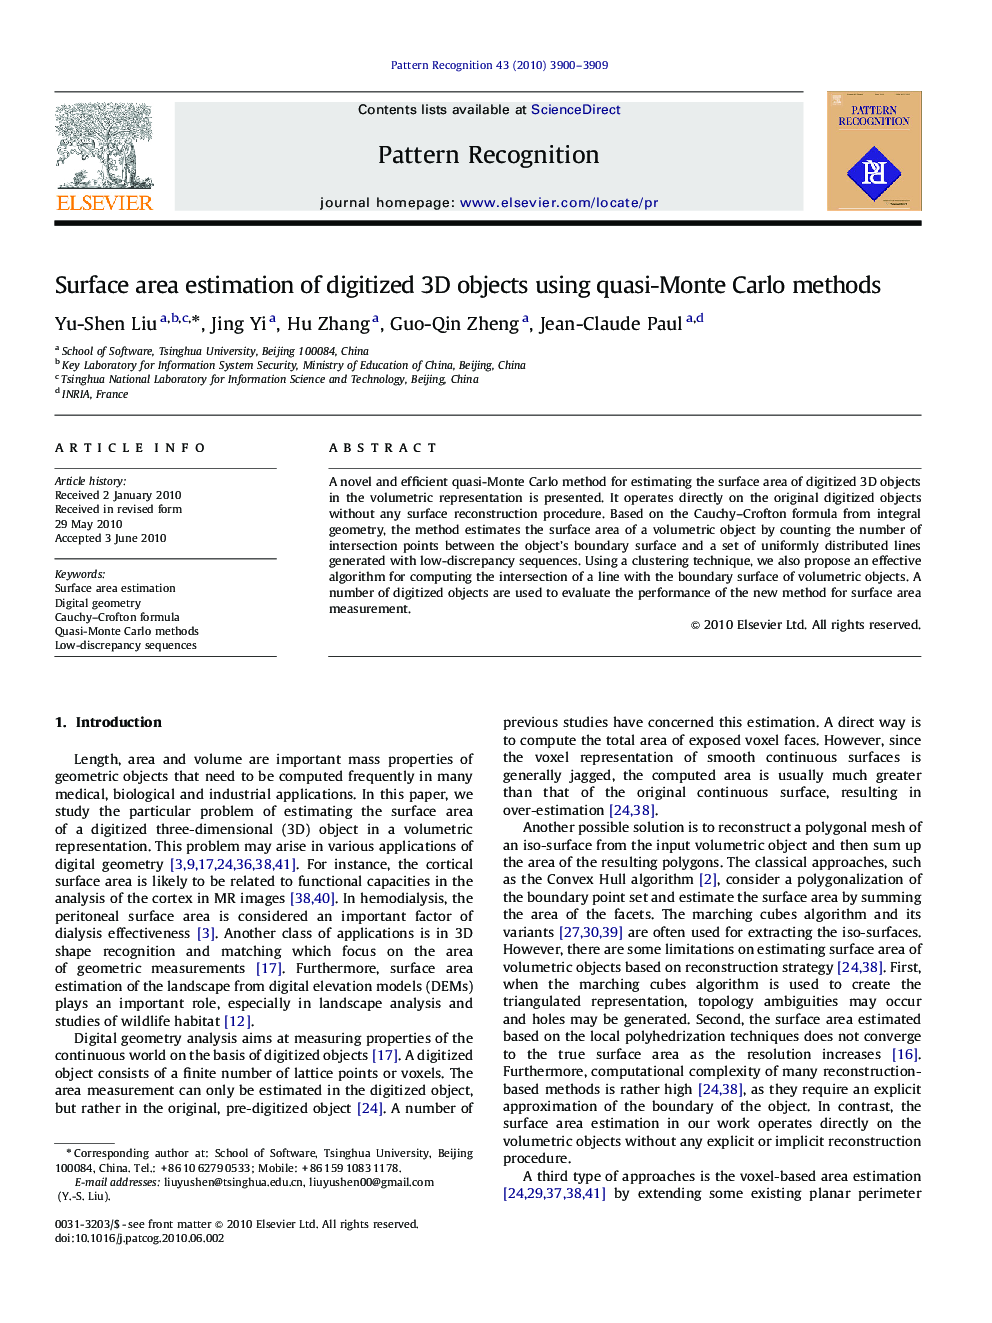 Surface area estimation of digitized 3D objects using quasi-Monte Carlo methods